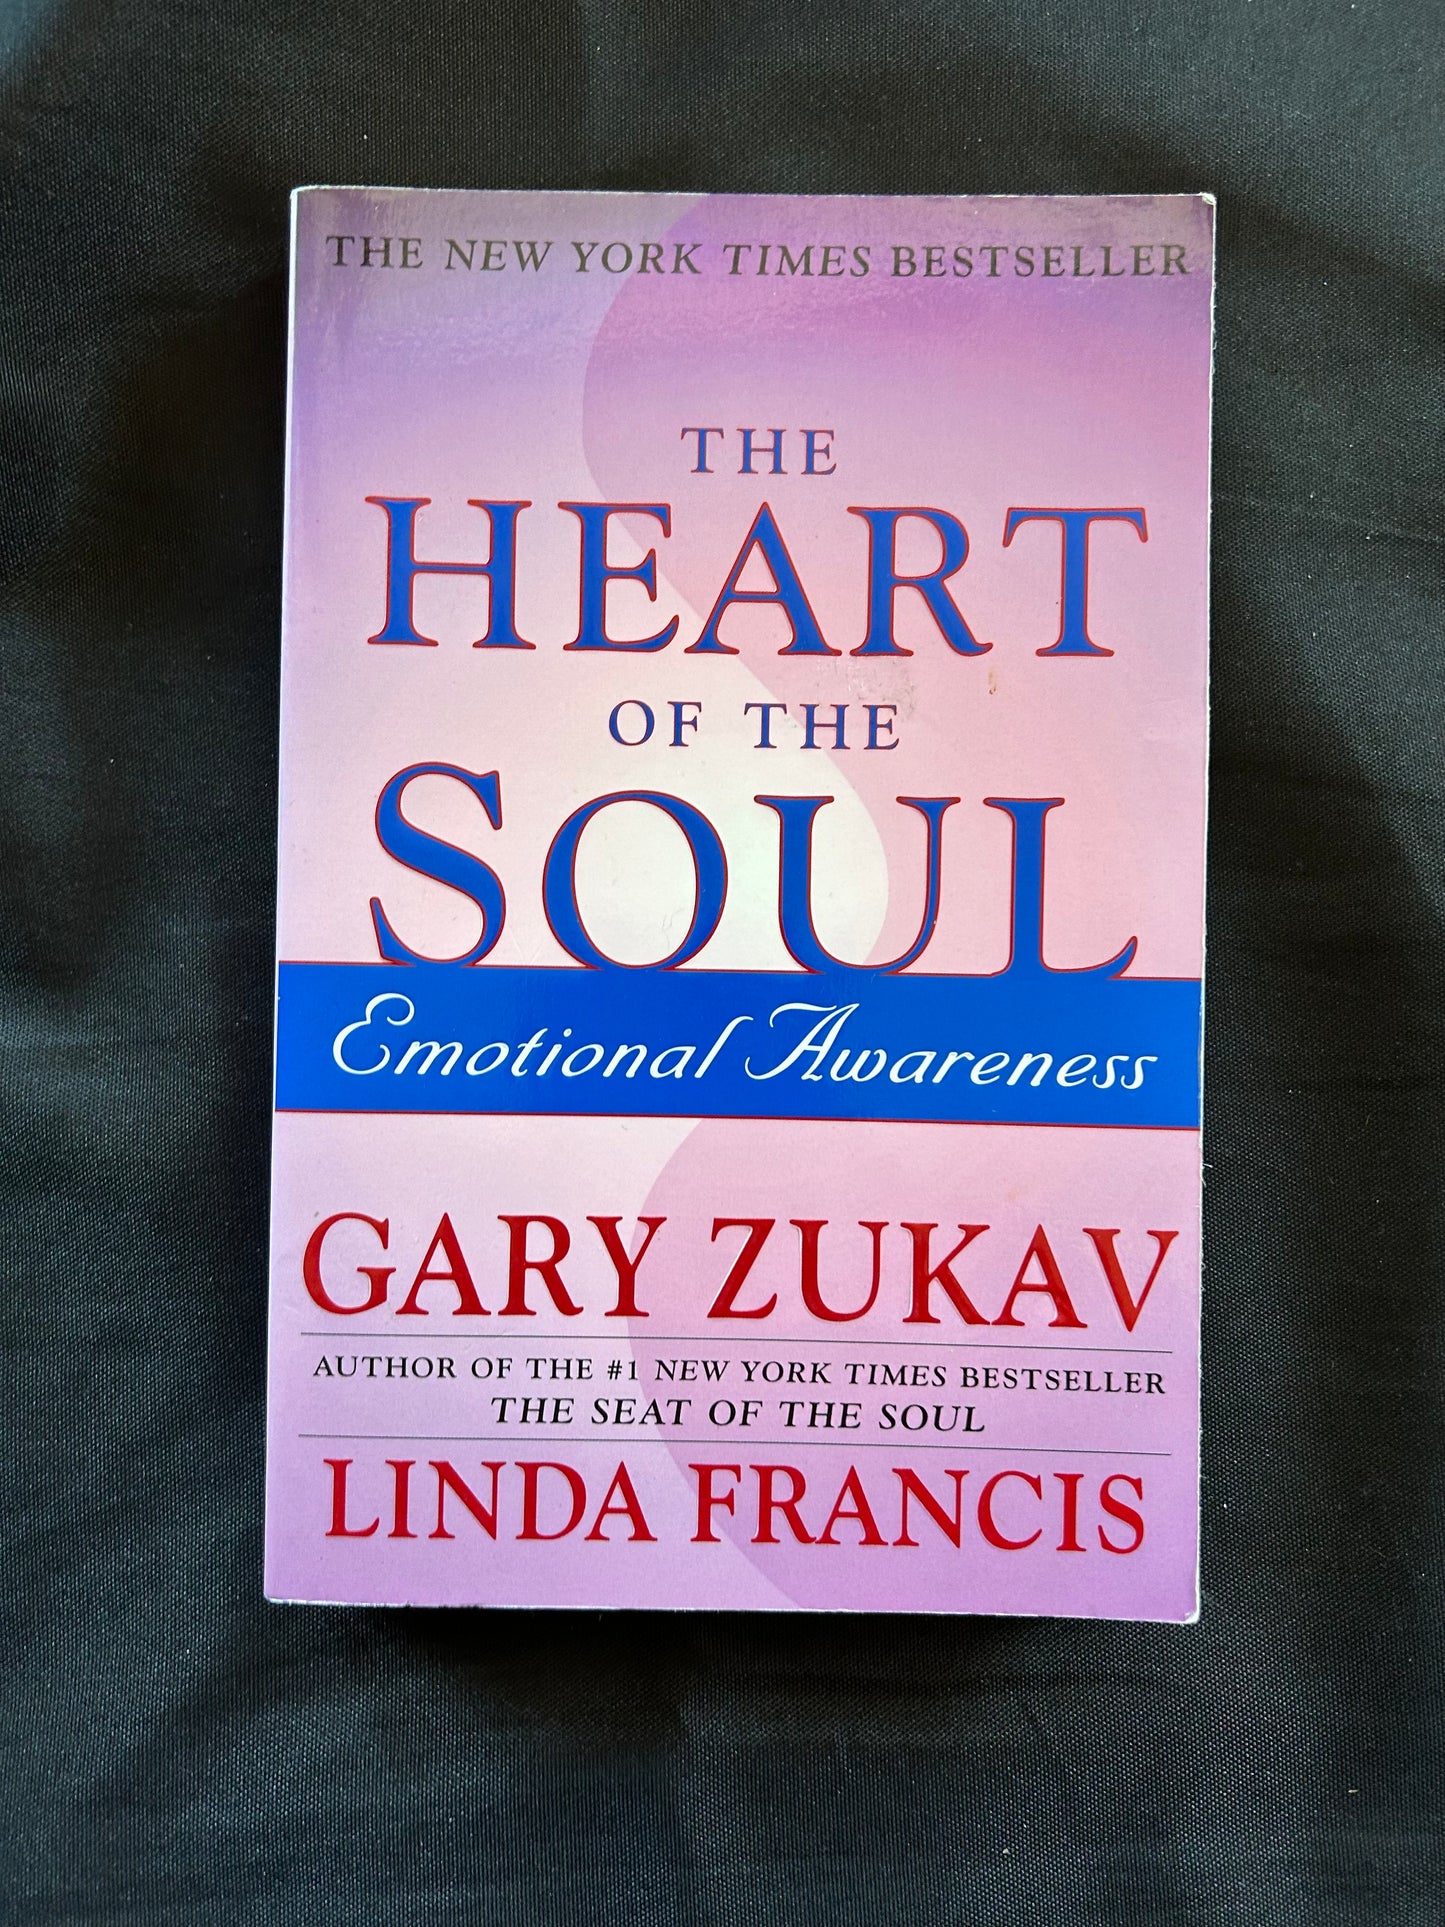 The Heart of the Soul